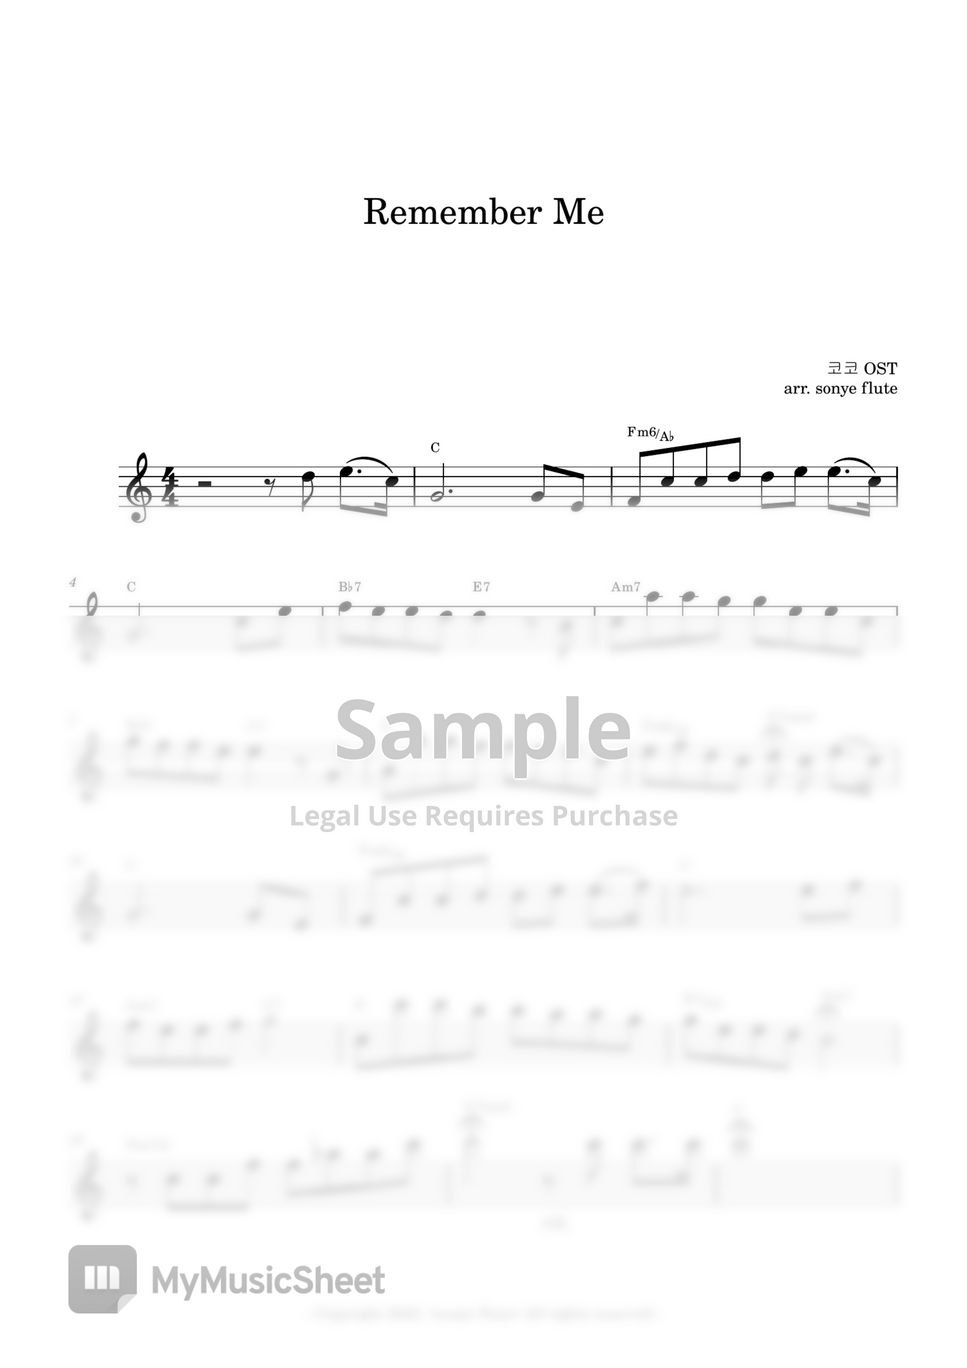 Disney Coco OST - Remember Me (Flute Sheet Music) by sonye flute